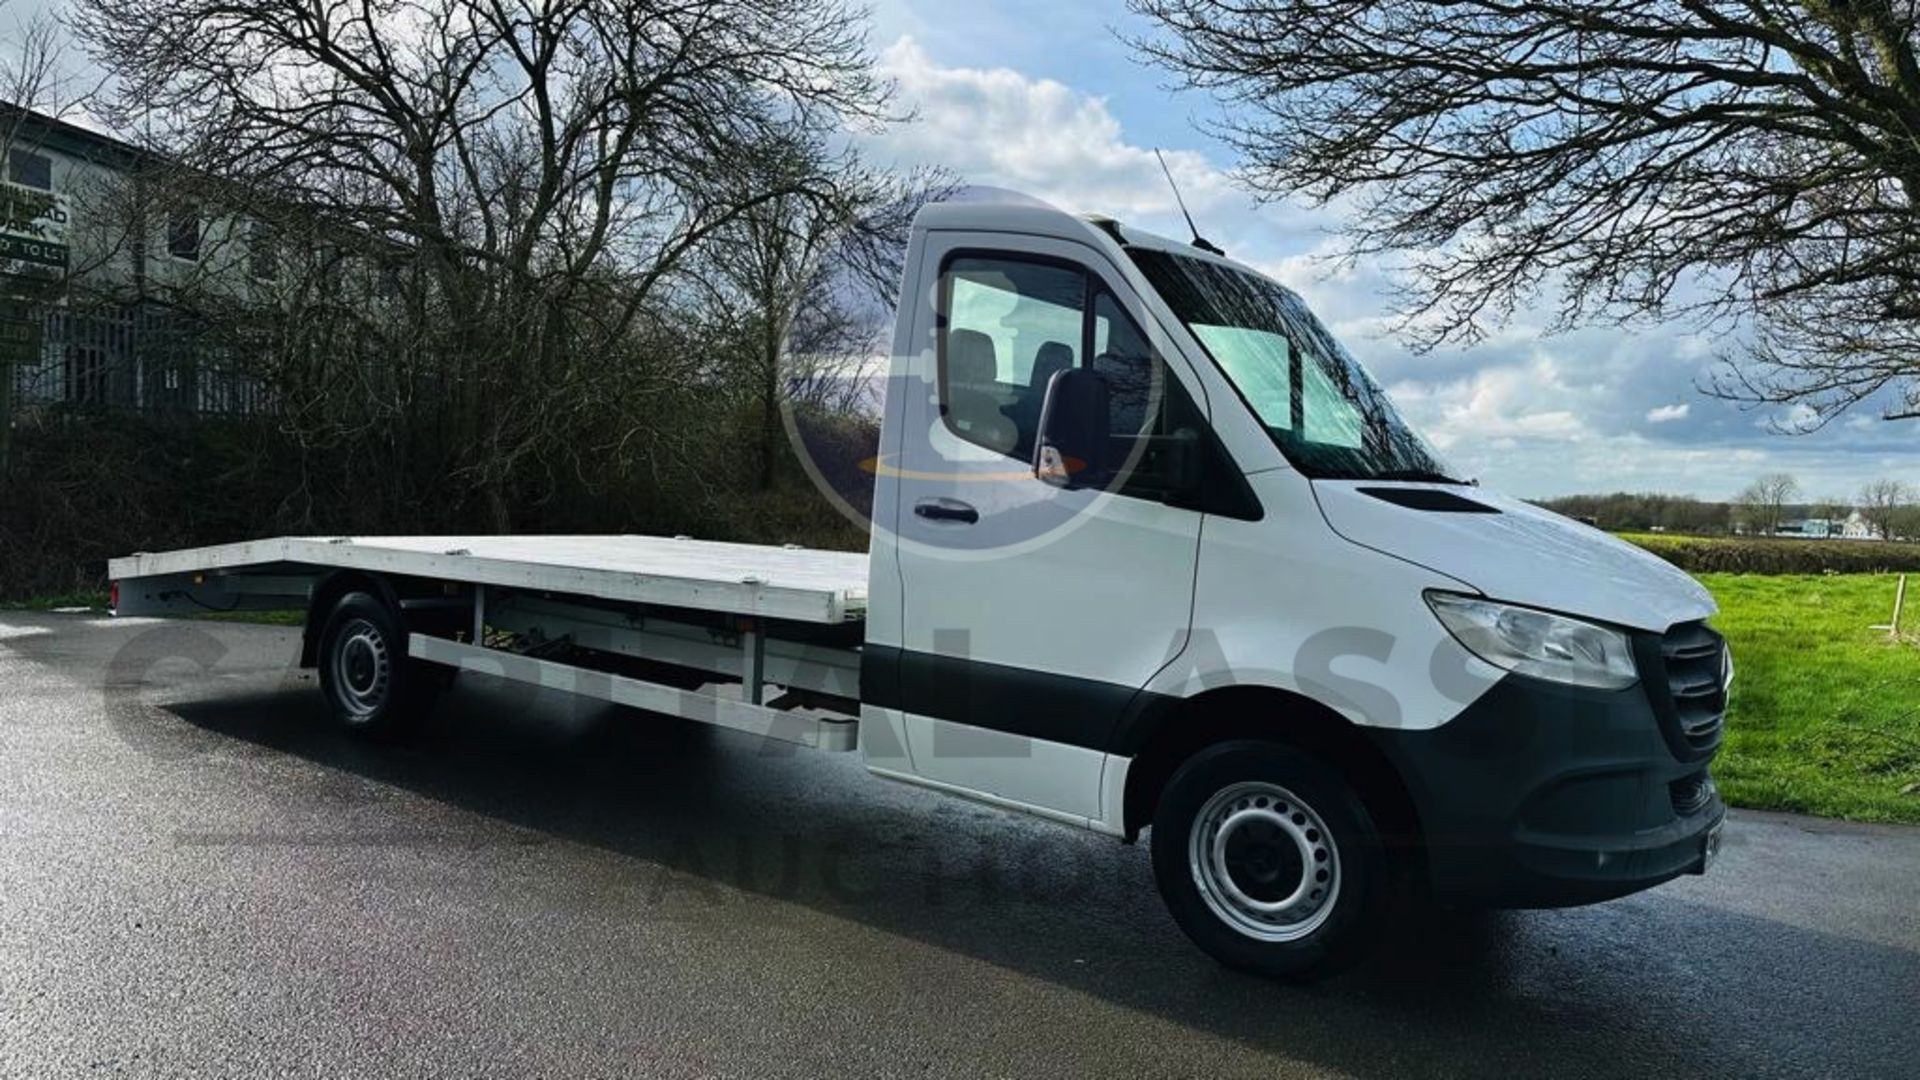 MERCEDES SPRINTER 314CDI "LWB RECOVERY TRUCK" 2019 MODEL - 1 OWNER - NEW BODY FITTED WITH ELEC WINCH - Image 3 of 37